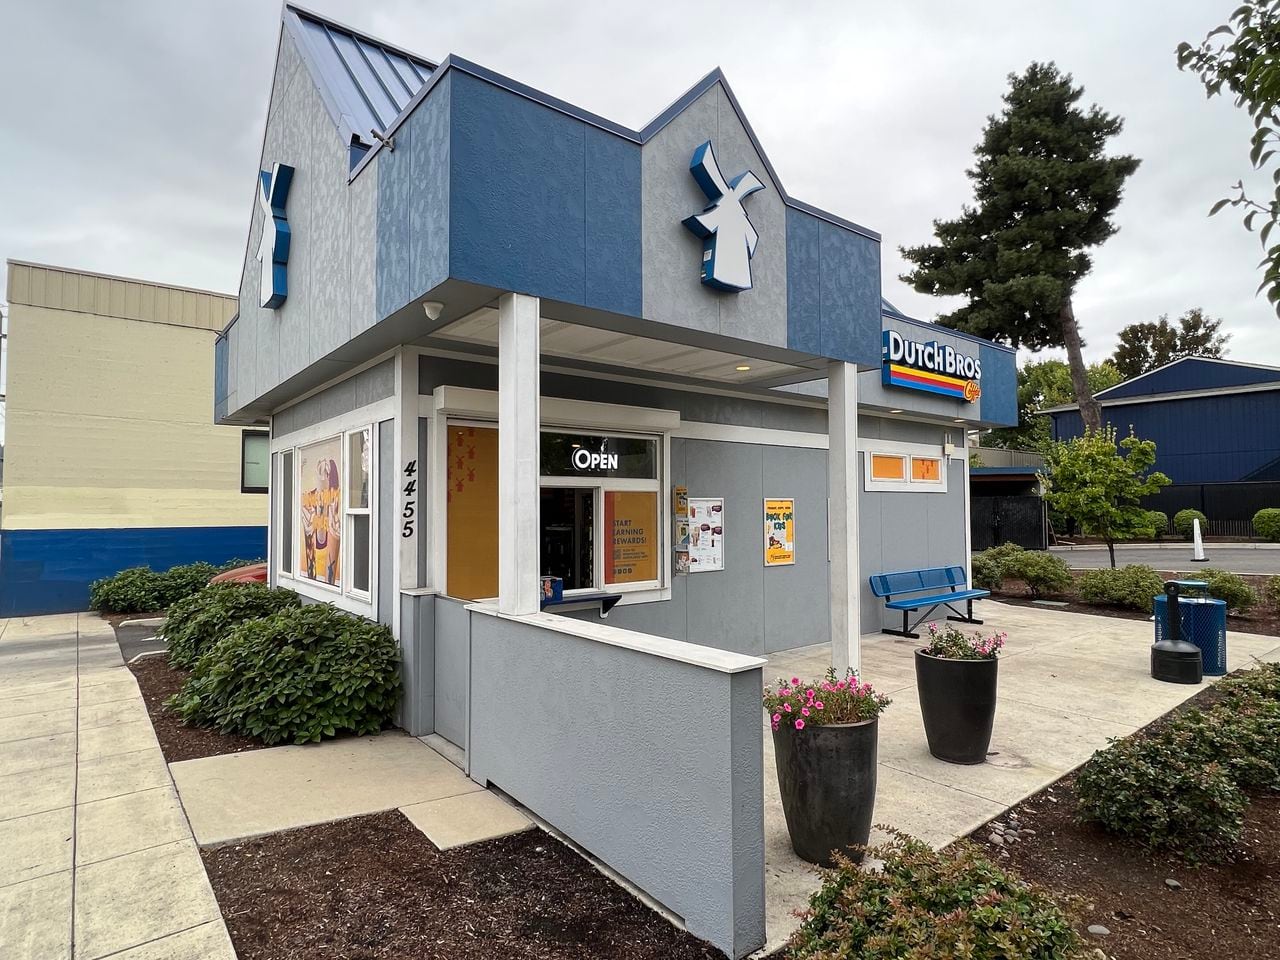 A blue-and-gray Dutch Bros drive-thru stand, with the company’s windmill logo on the roofline.